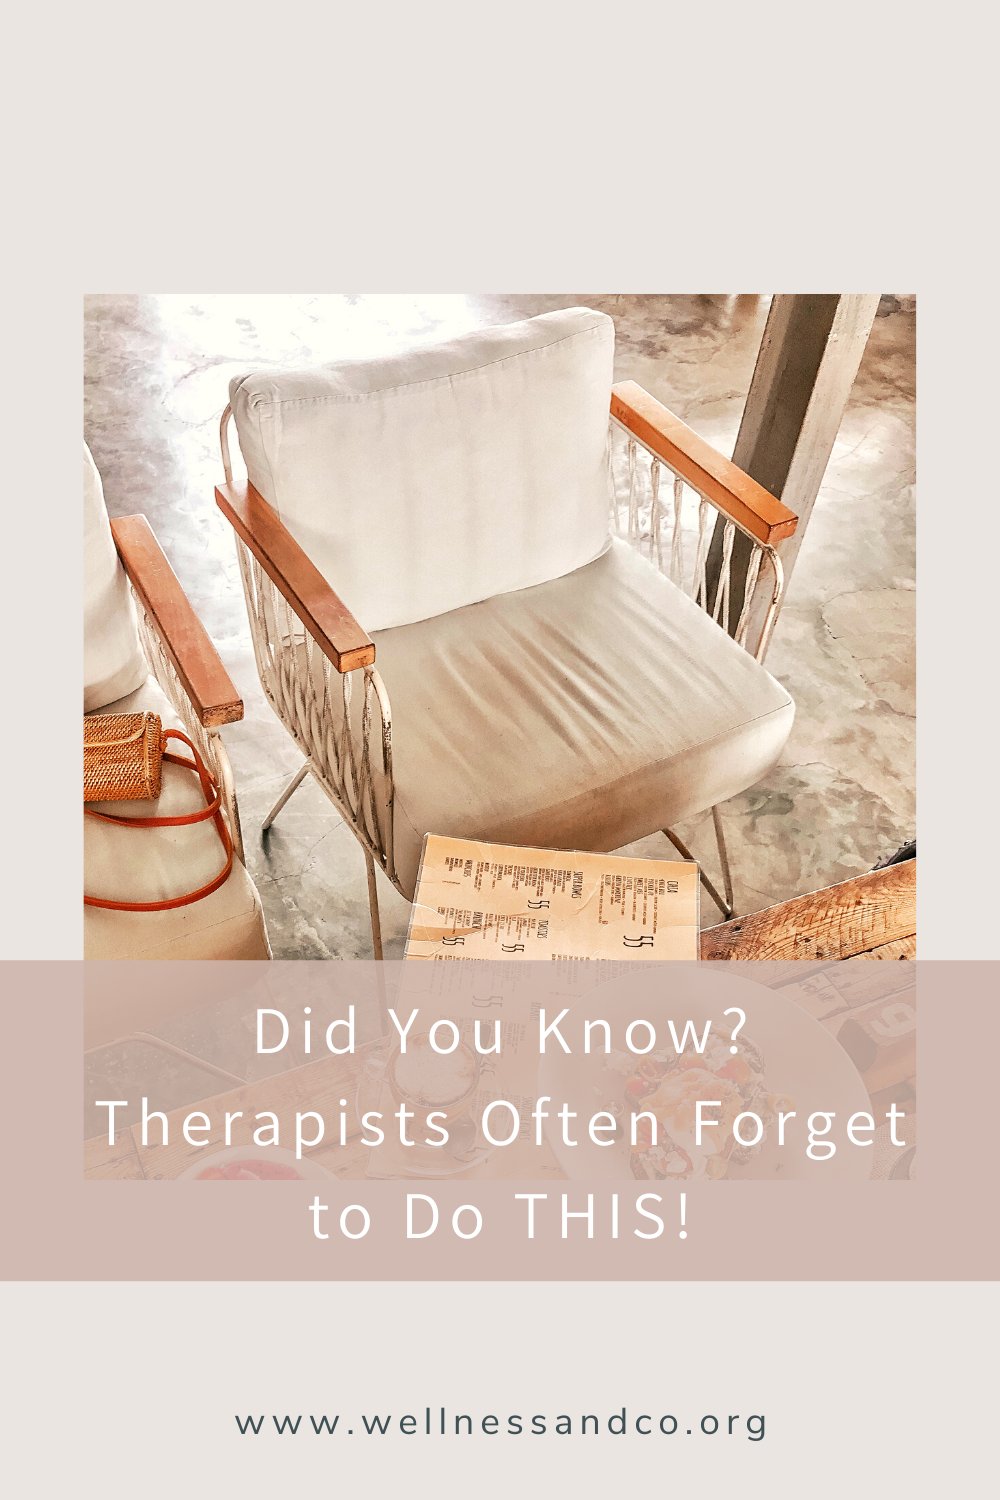 Did You Know? Therapists Often Forget to Do This! | Many therapists have routines and patterns that they stick to when seeing clients. This post gives an insider look, in poem form, into something many therapists struggle to make time for in their busy day.